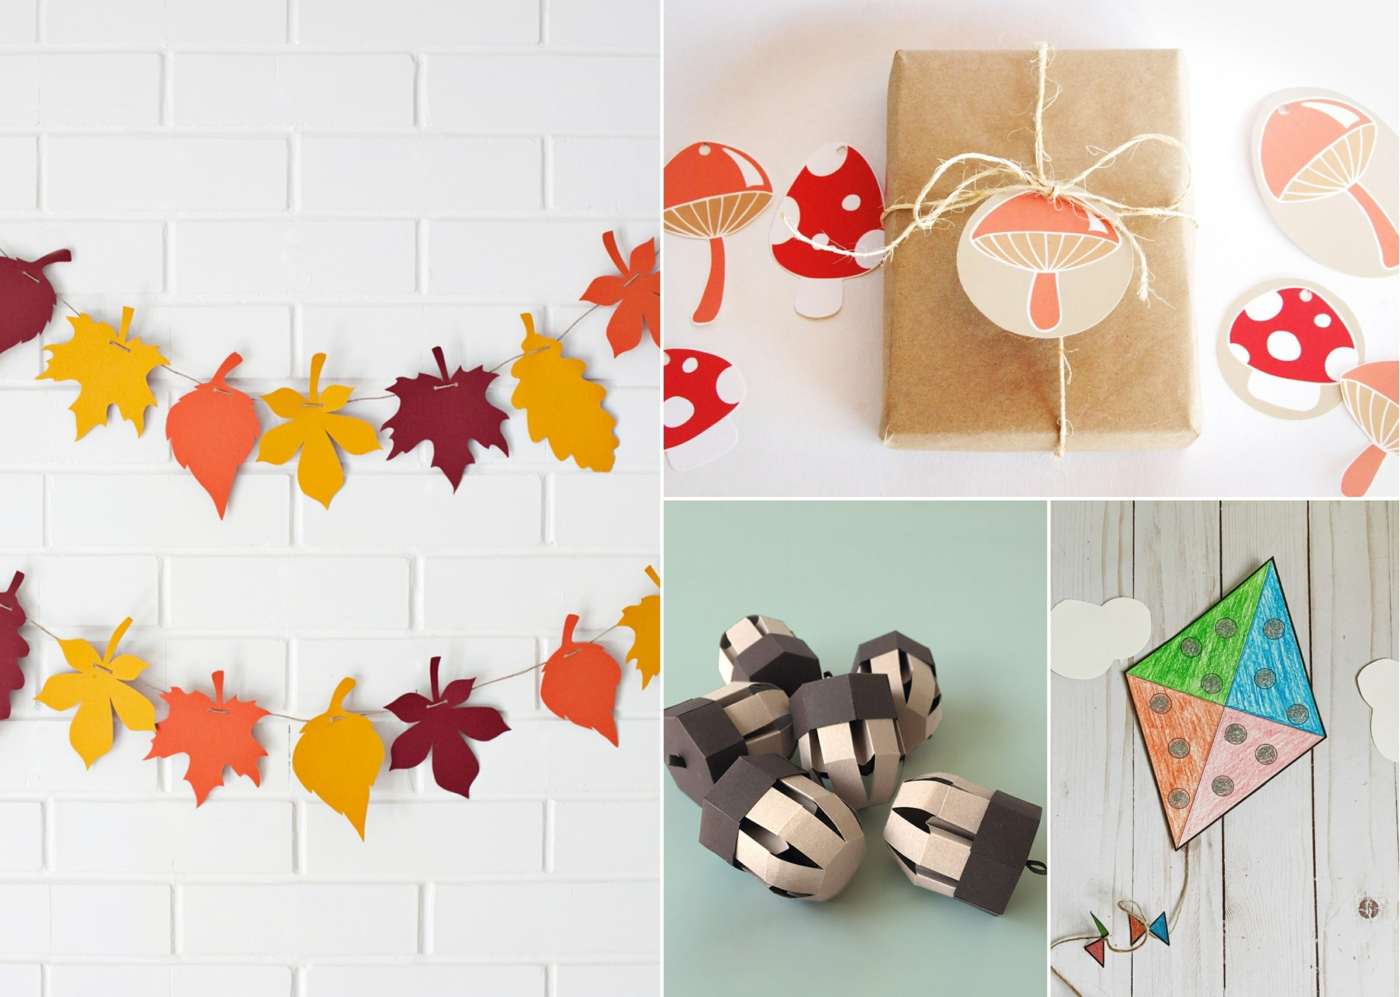 Print craft ideas for autumn free of charge and book with kids